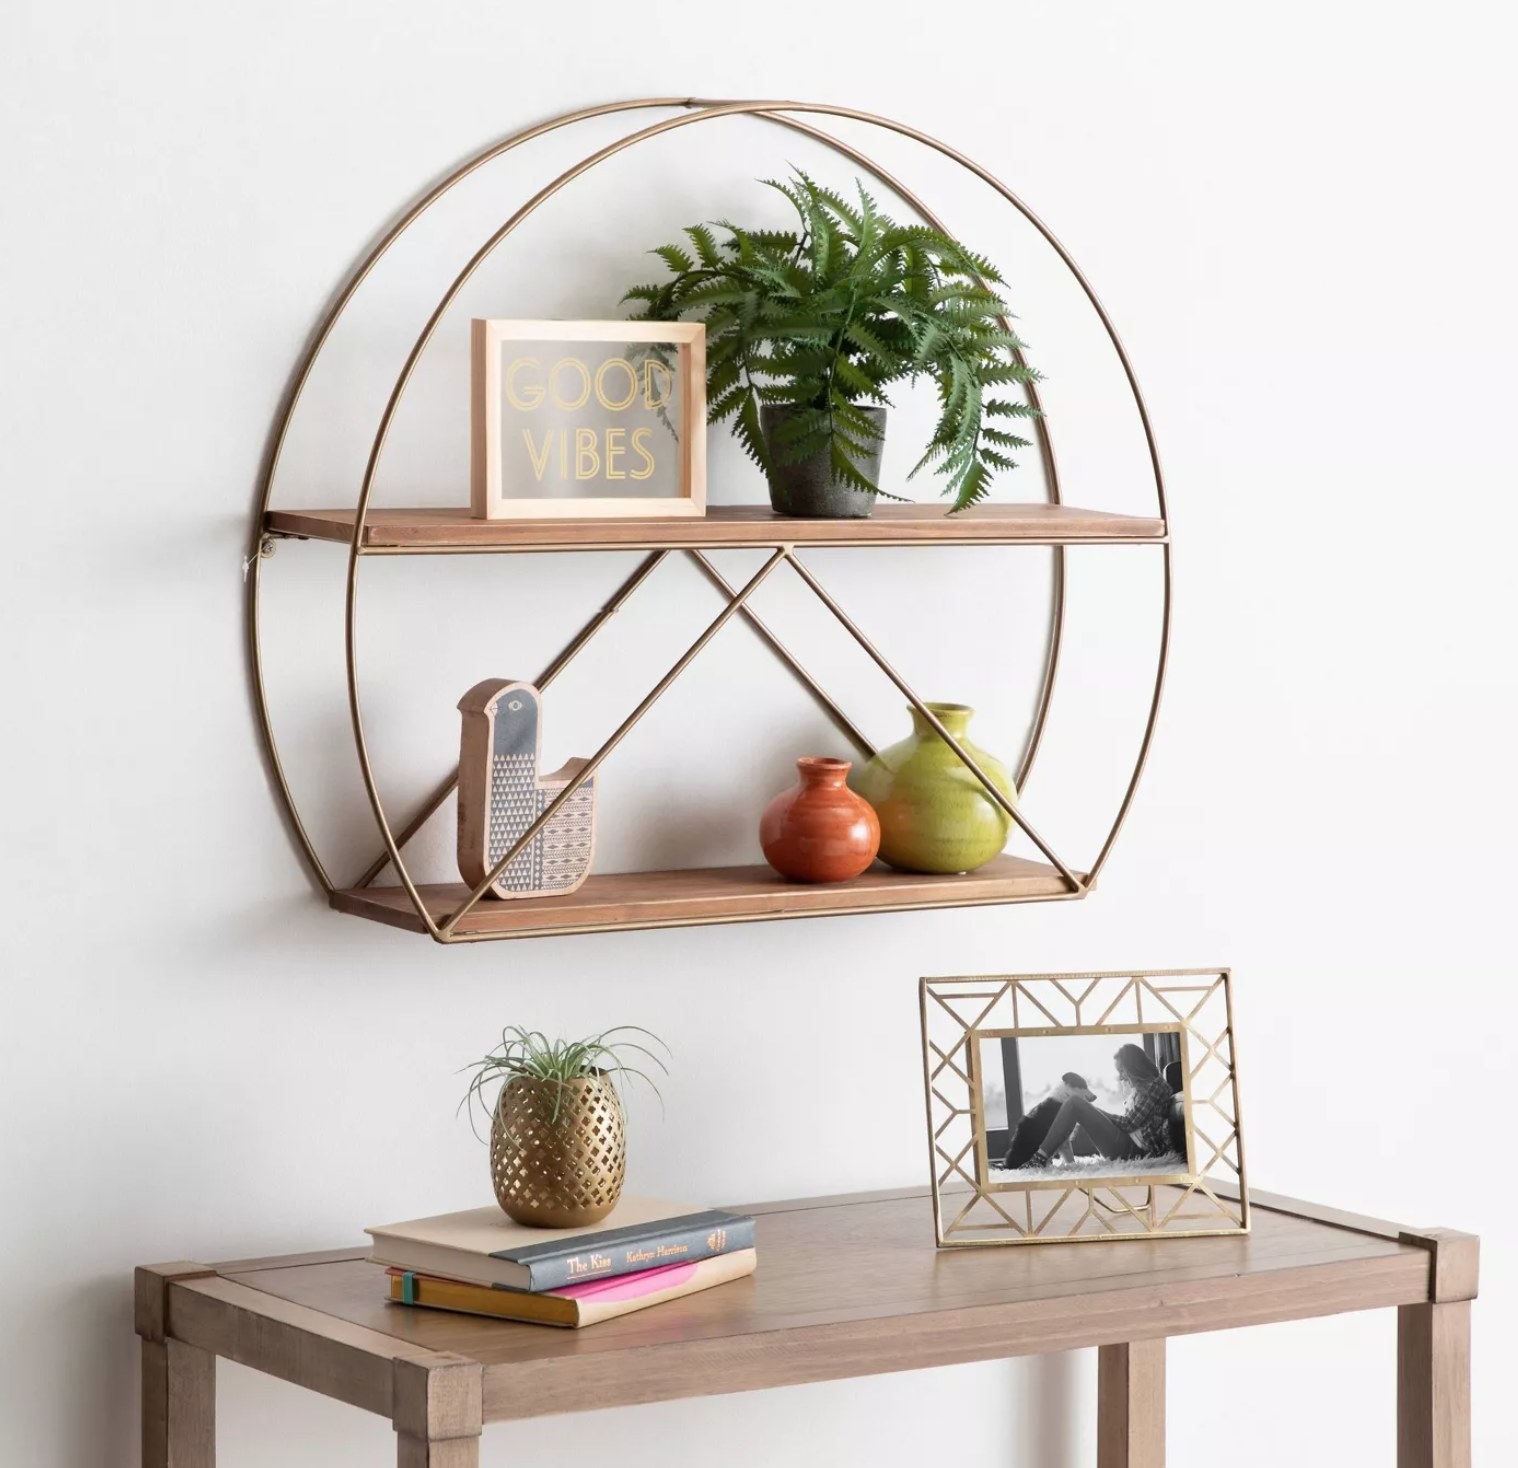 The rounded wall shelf with pots and decorations on it